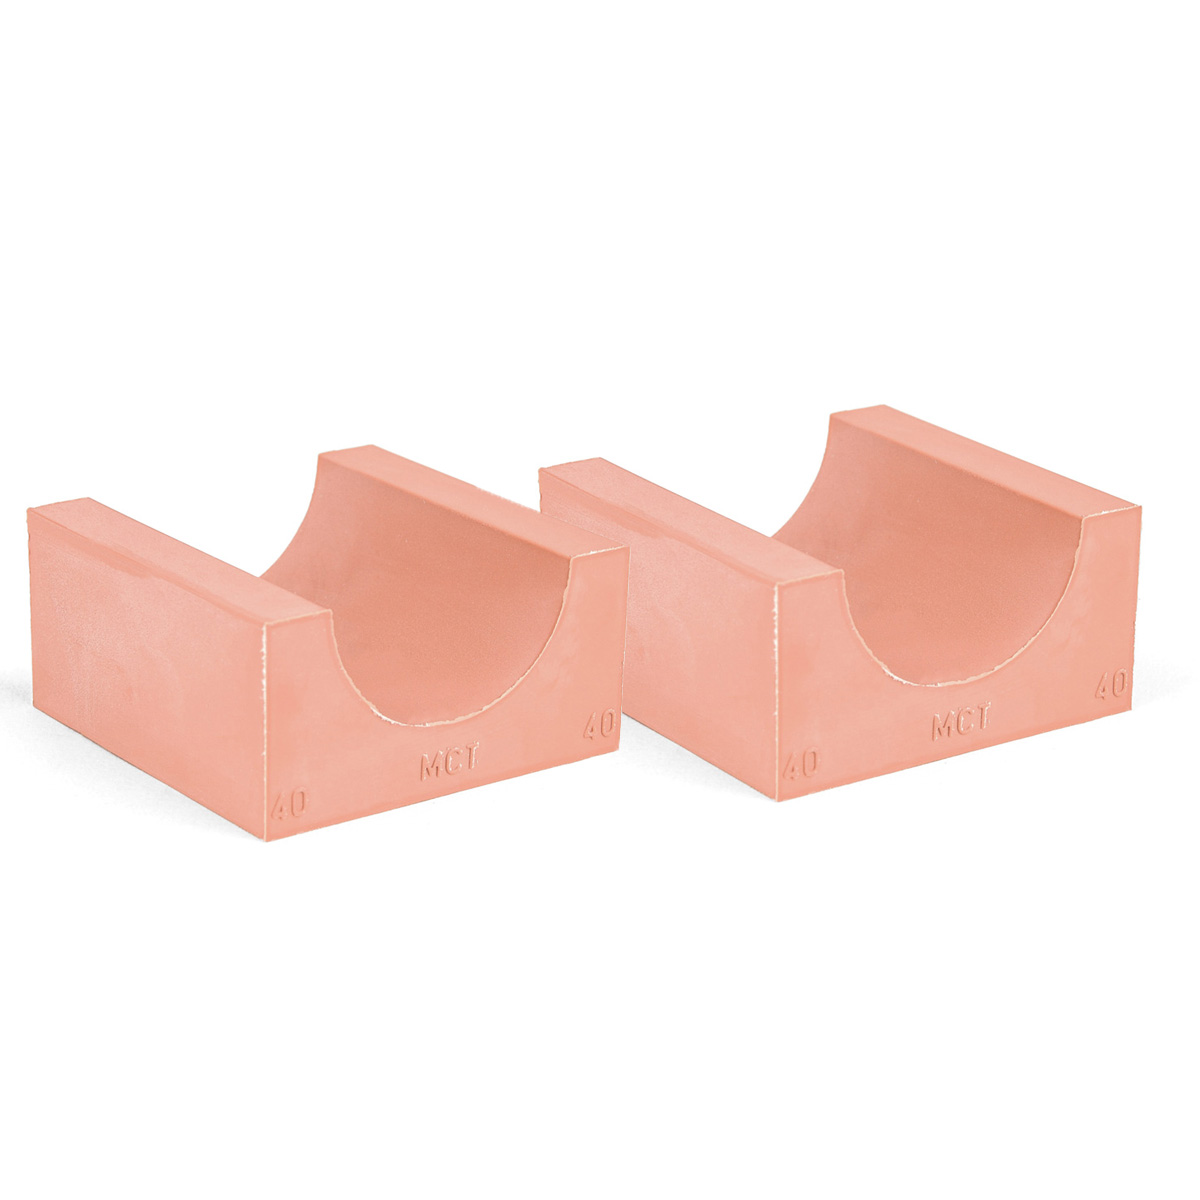 60-40*2 Set of 2 half insert block lycron, 60-40 for cable/pipe diam. 39.5-41.5mm